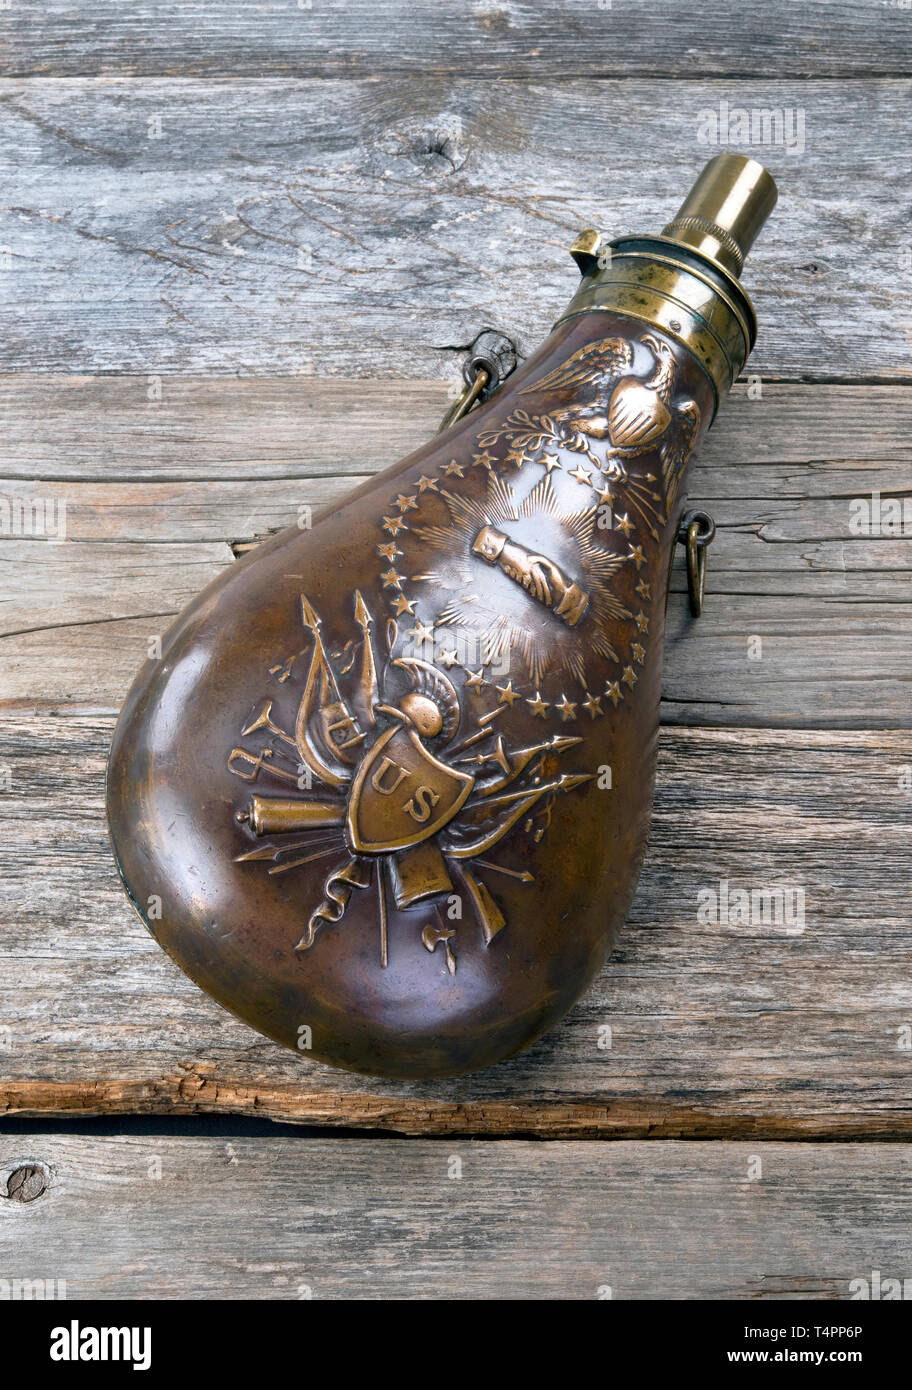 https://c8.alamy.com/comp/T4PP6P/antique-eagle-gunpowder-flask-made-around-made-around-1838-and-would-of-been-used-in-the-mexican-american-war-and-civil-war-by-soidiers-T4PP6P.jpg